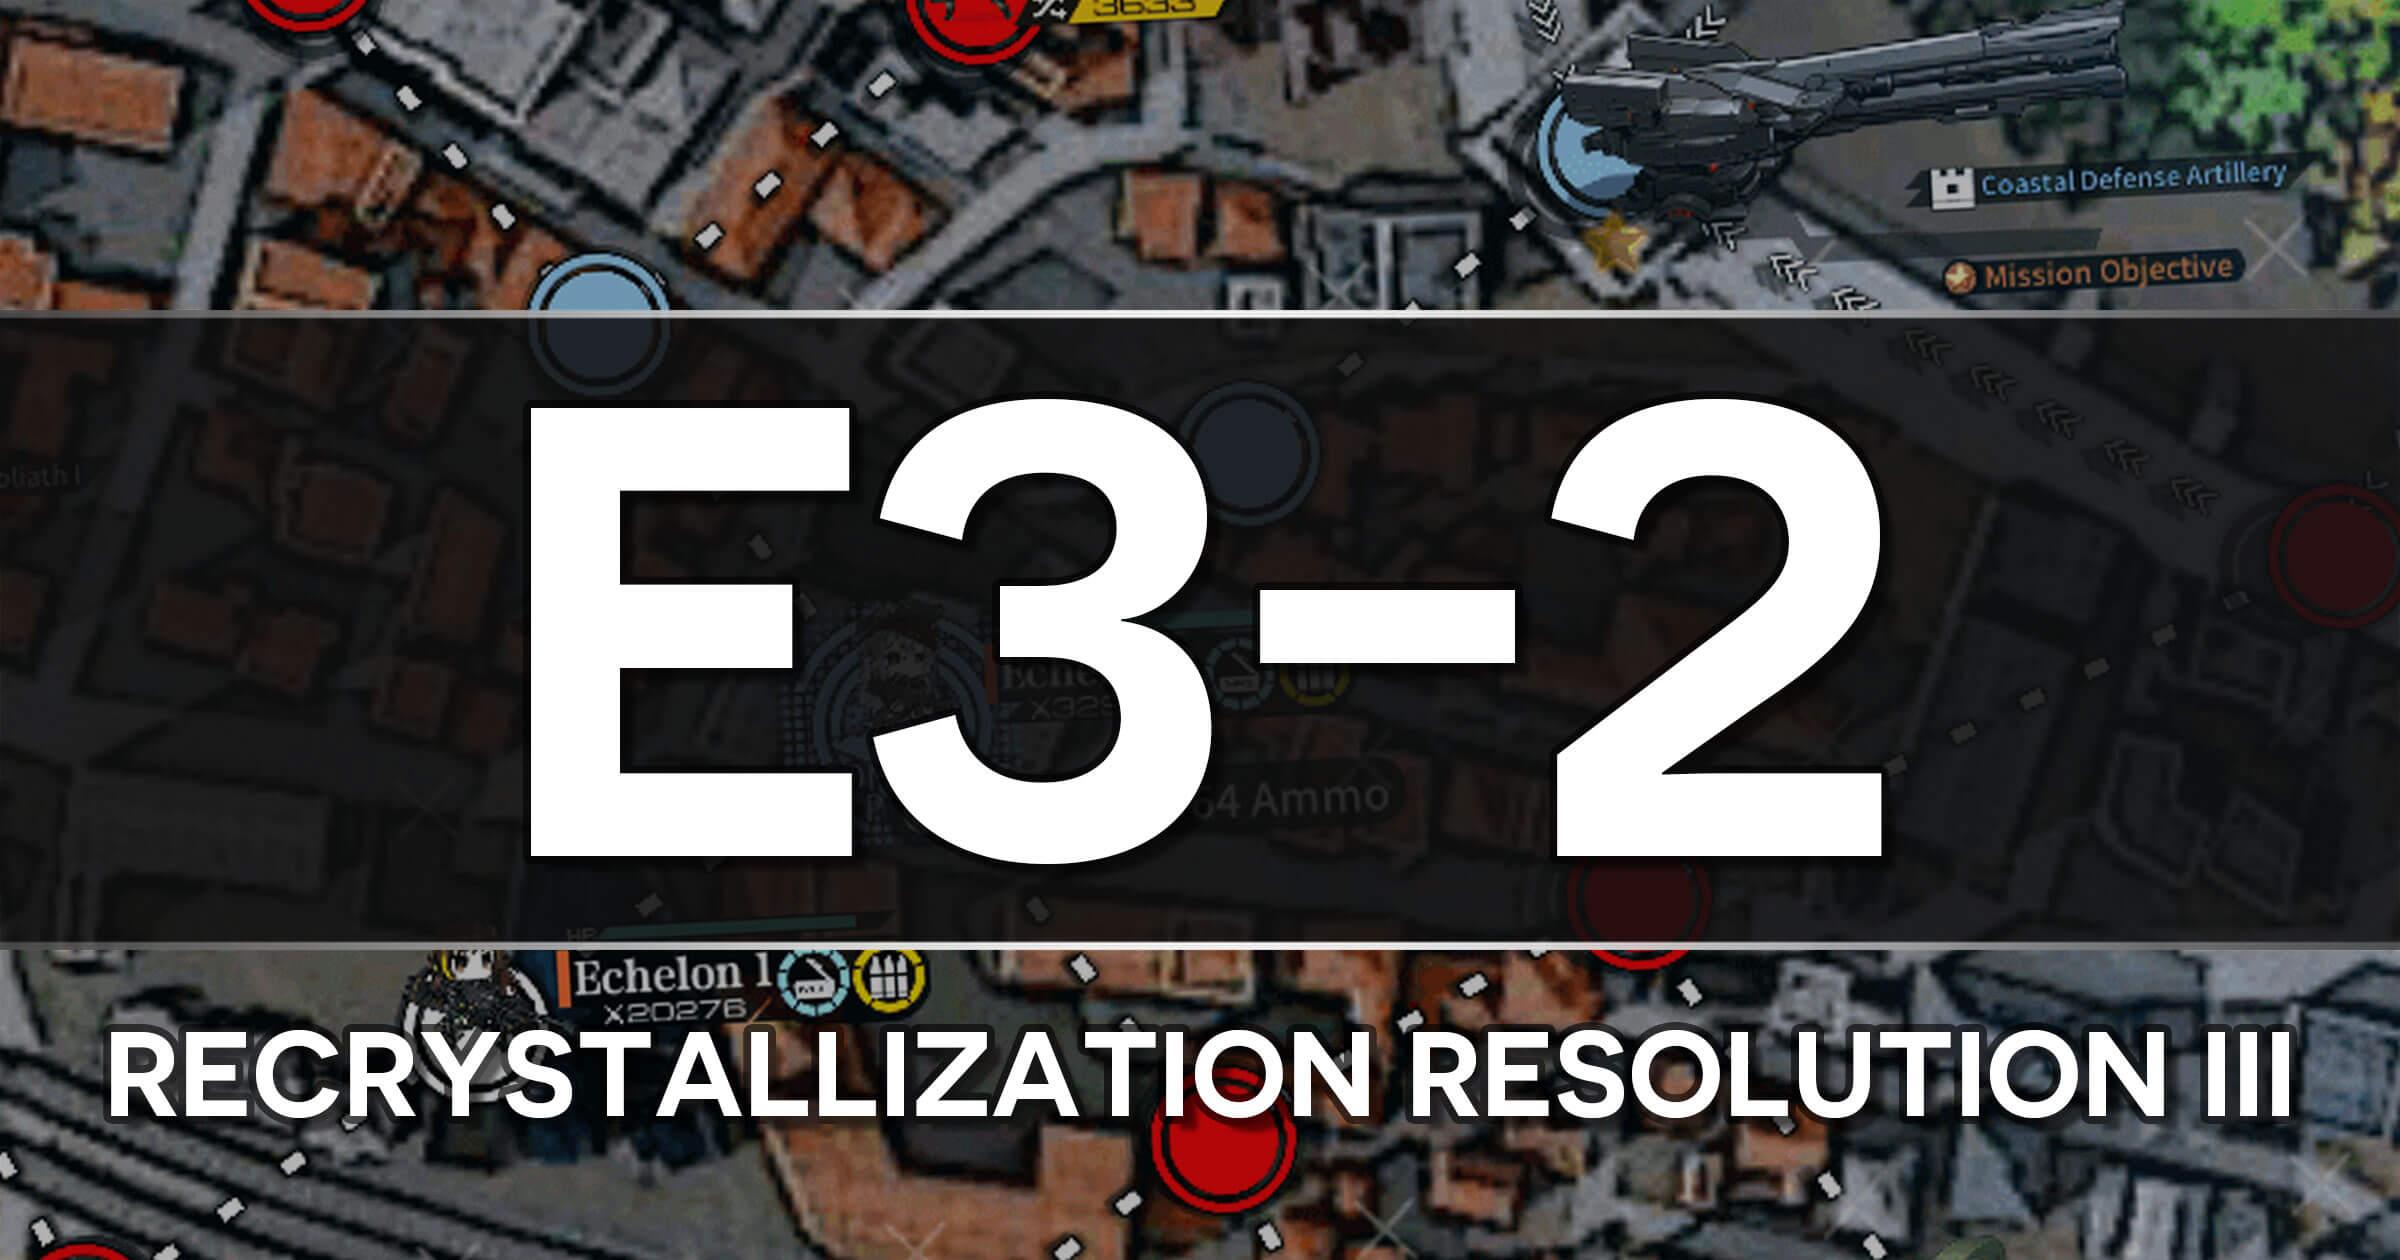 A guide to the Girls Frontline Polarized Light Event stage E3-2: Recrystallization Resolution III